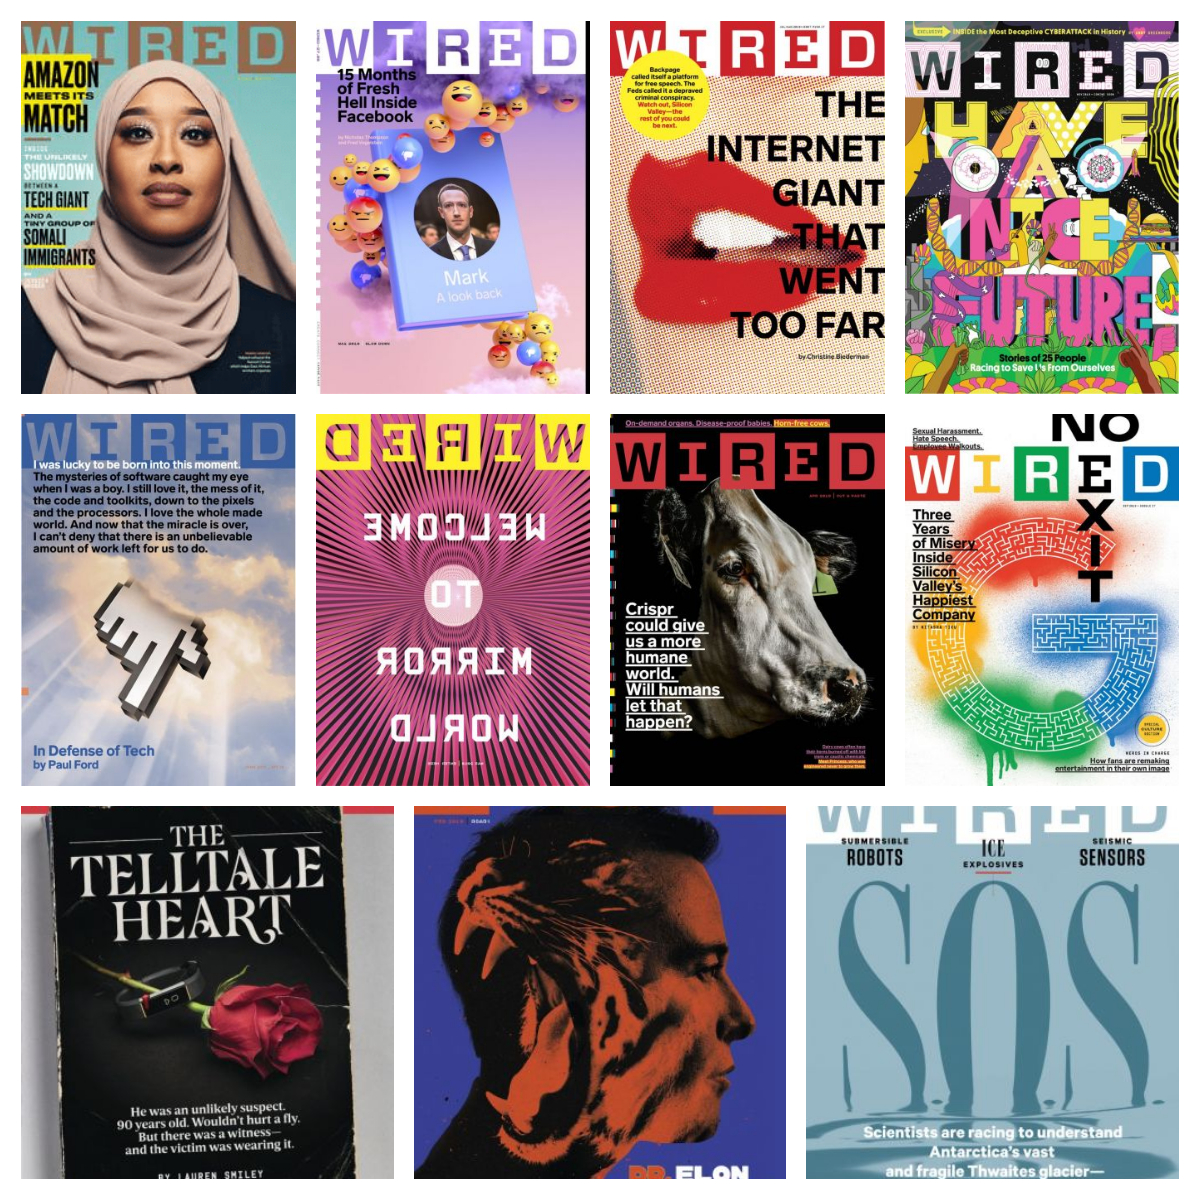 Wired USA - 2019 Full Year Issues Collection